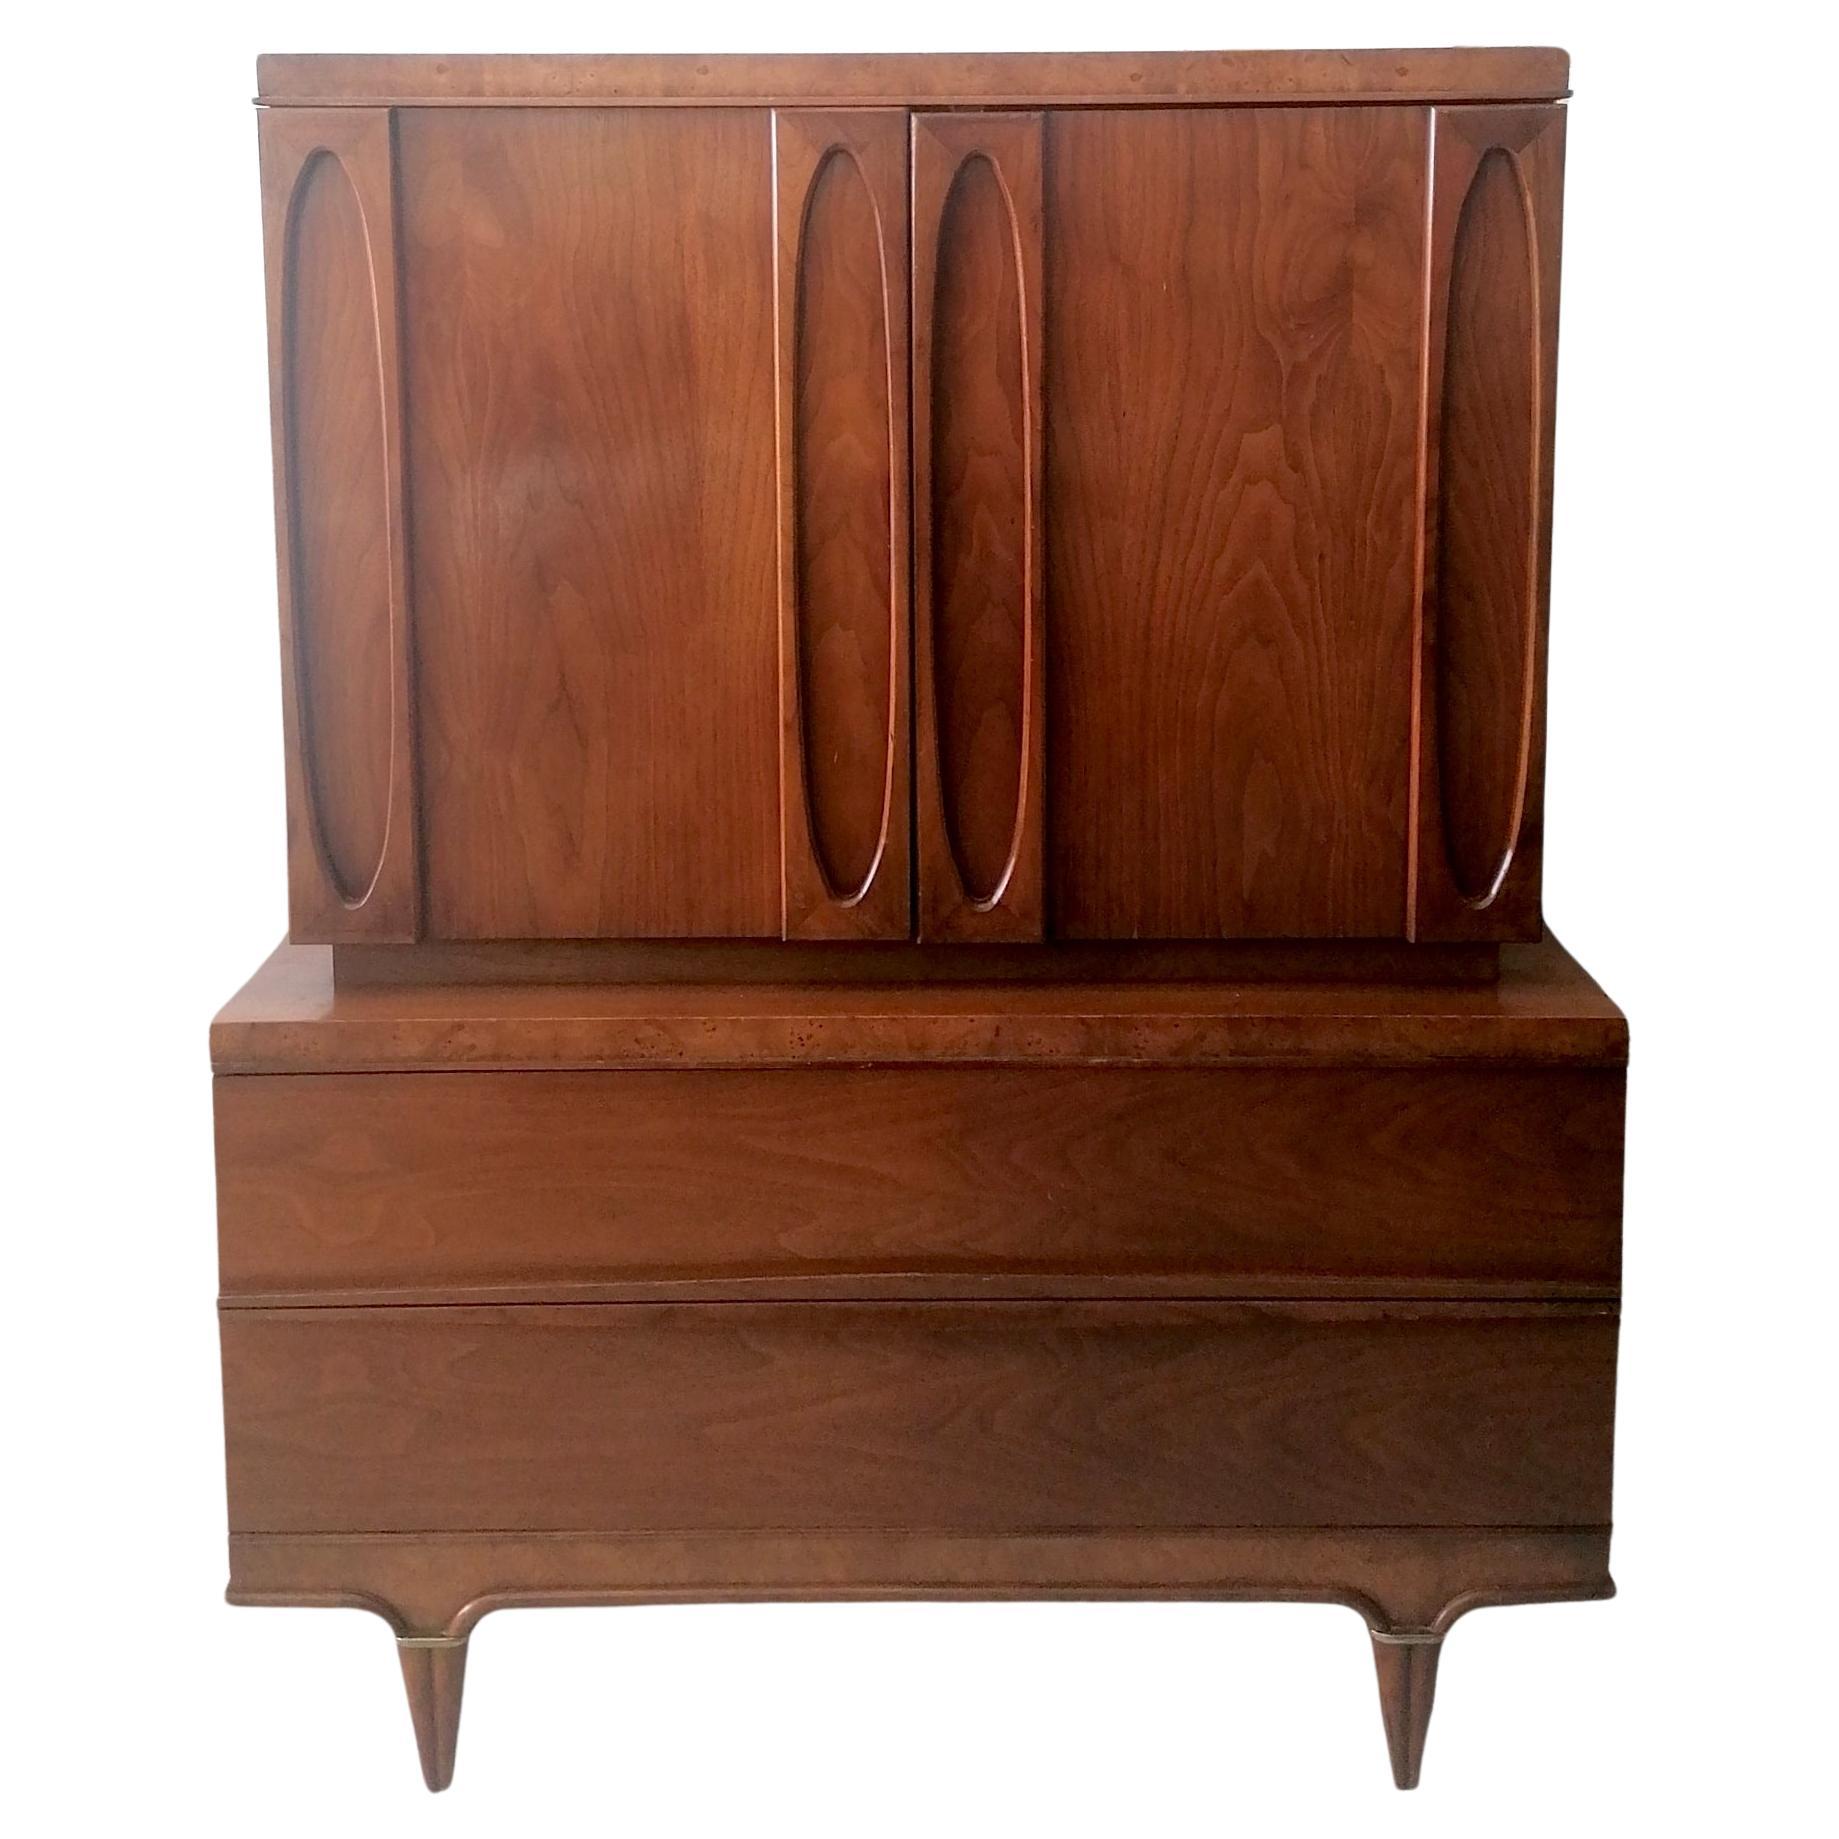 Tall midcentury American walnut & burl cabinet by American of Martinsville 1960s For Sale